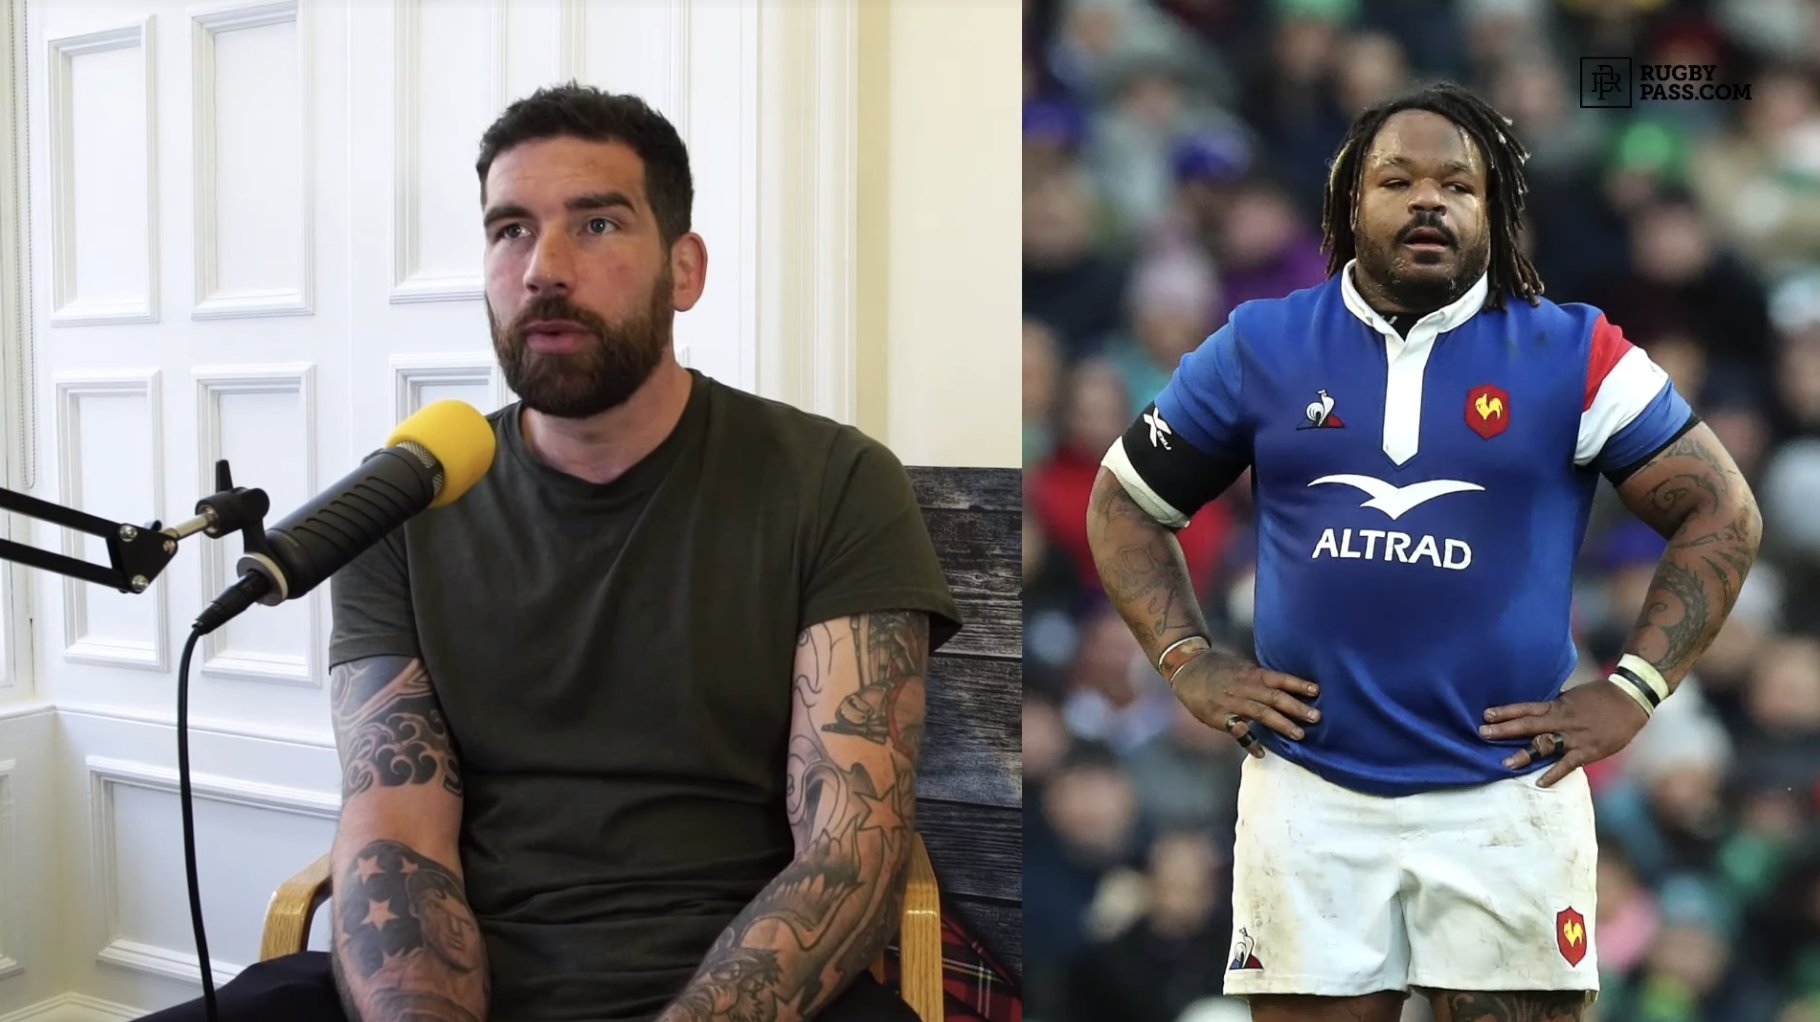 "He's going to kill people out there". - Jim Hamilton fears what Mathieu Bastareaud will do in the MLR